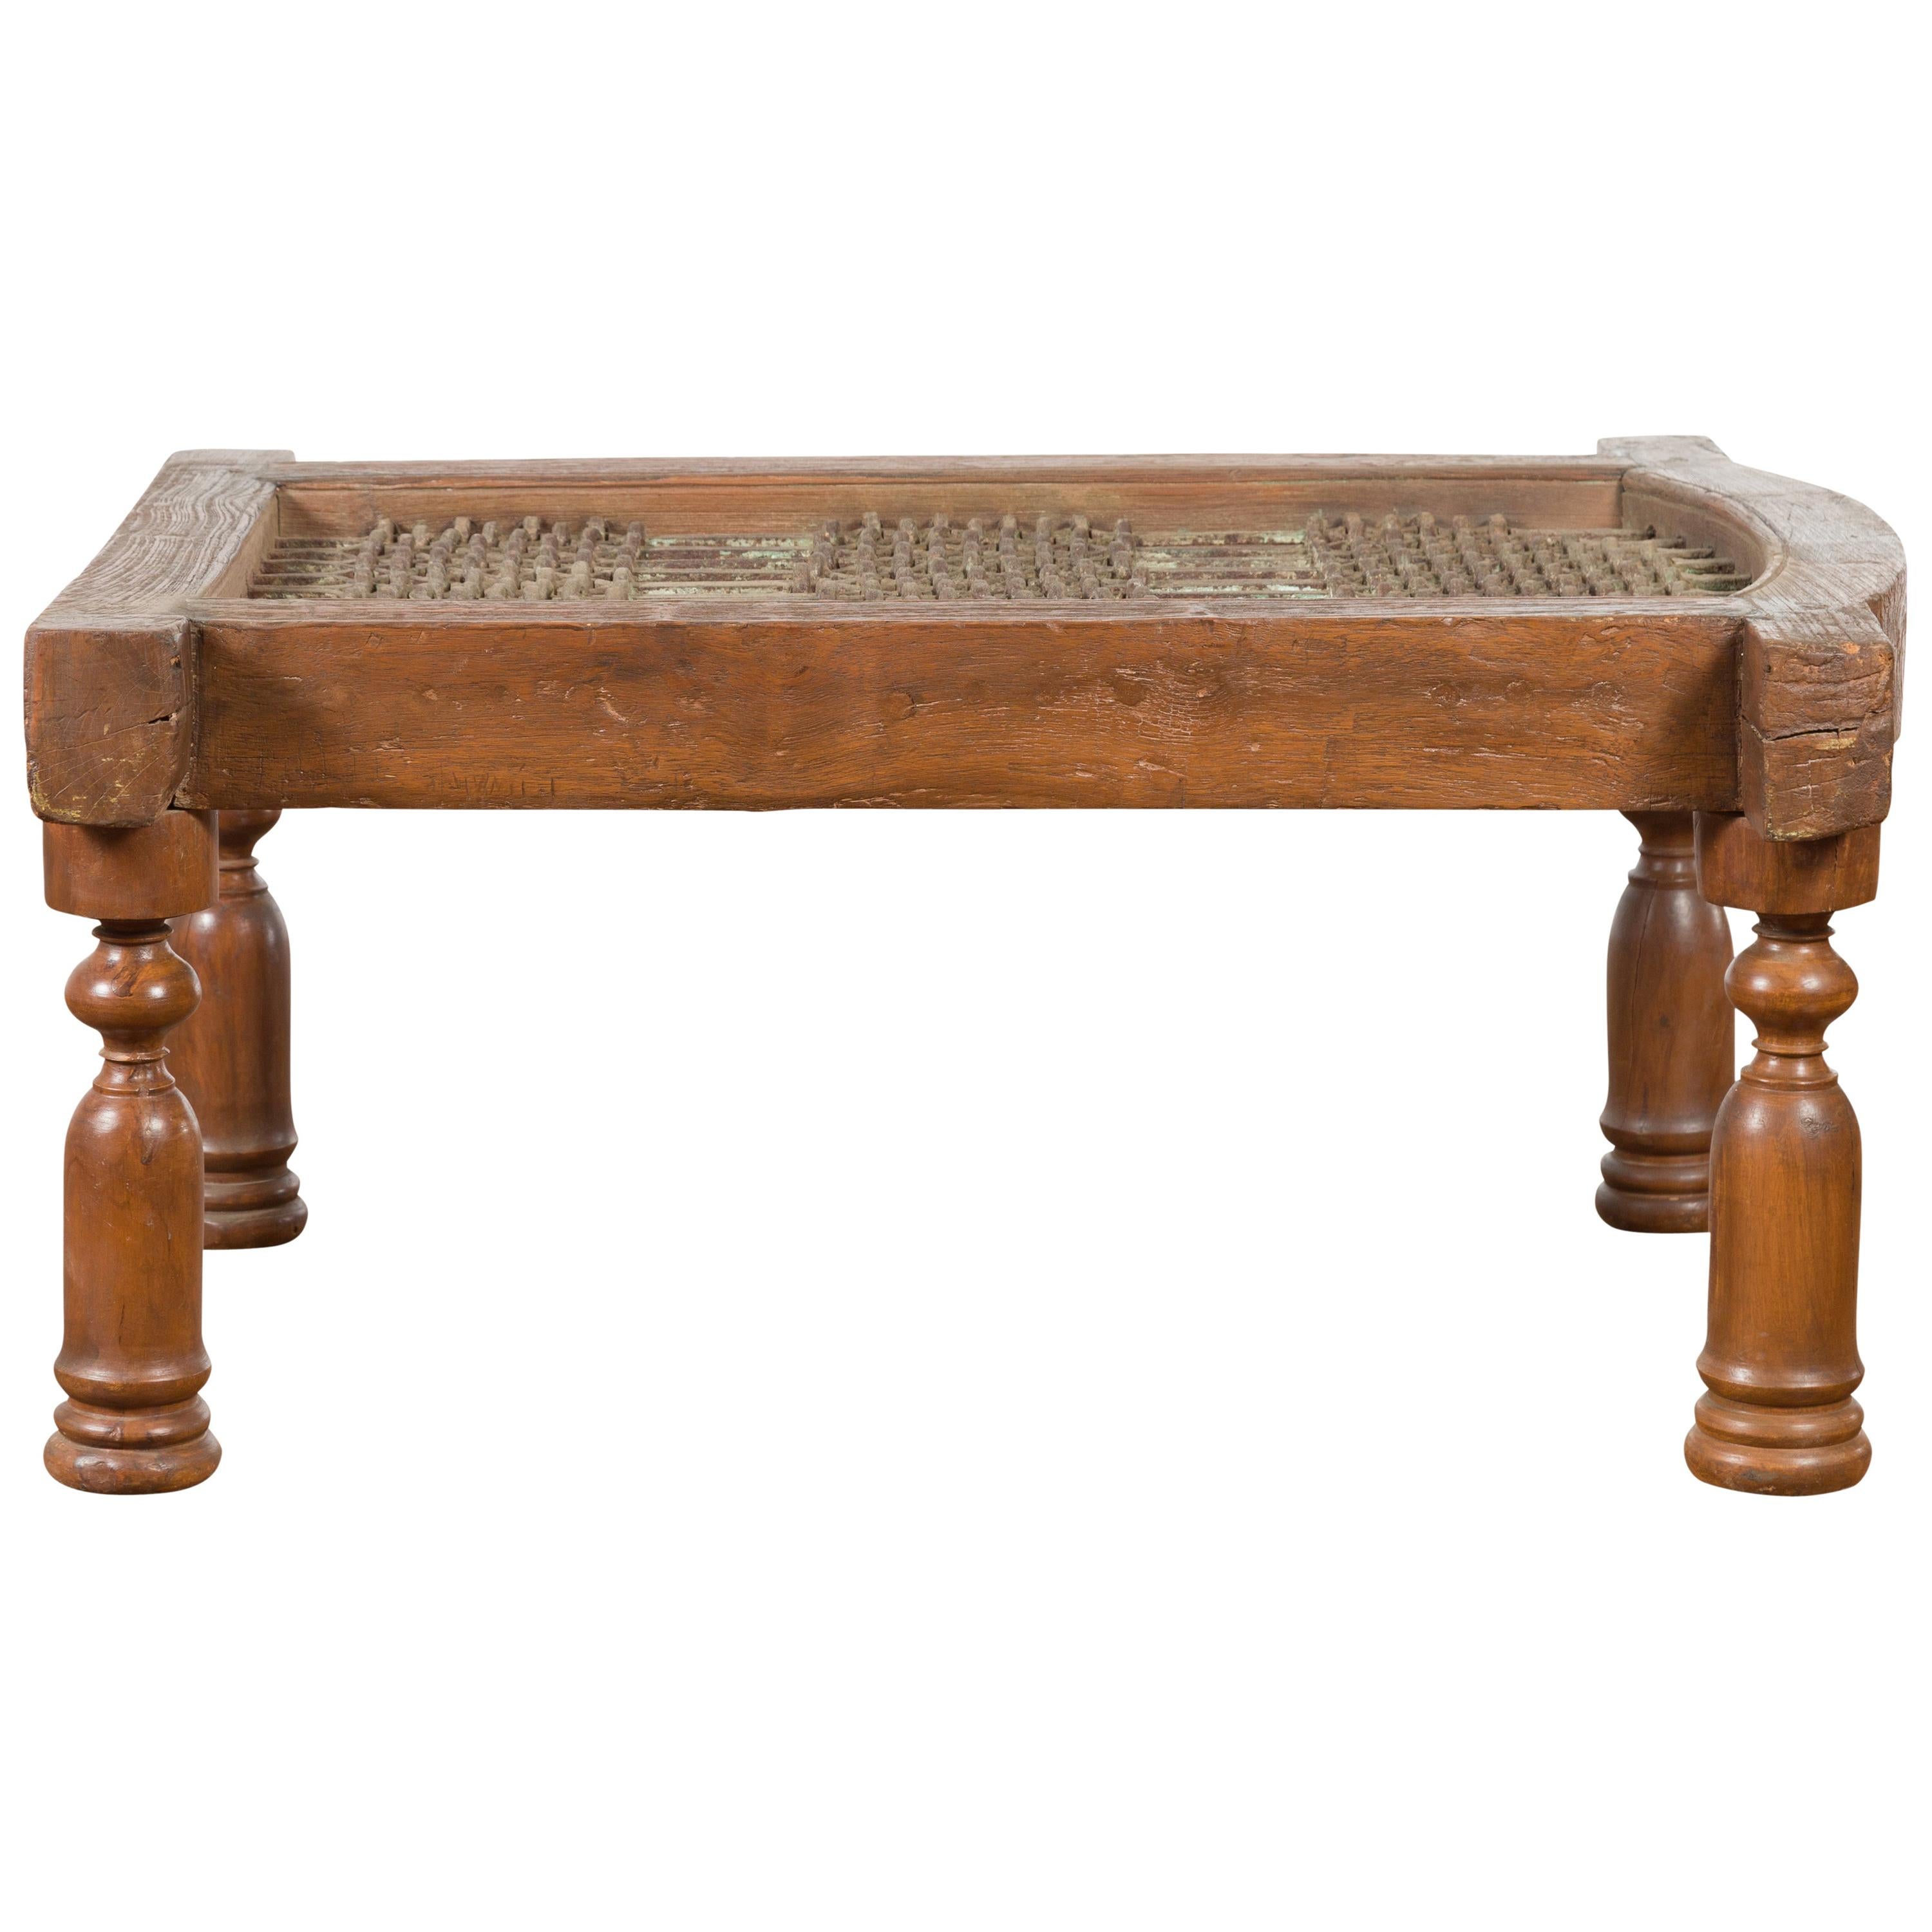 Antique Indian Arched Window Grate Made into a Coffee Table with Baluster Legs